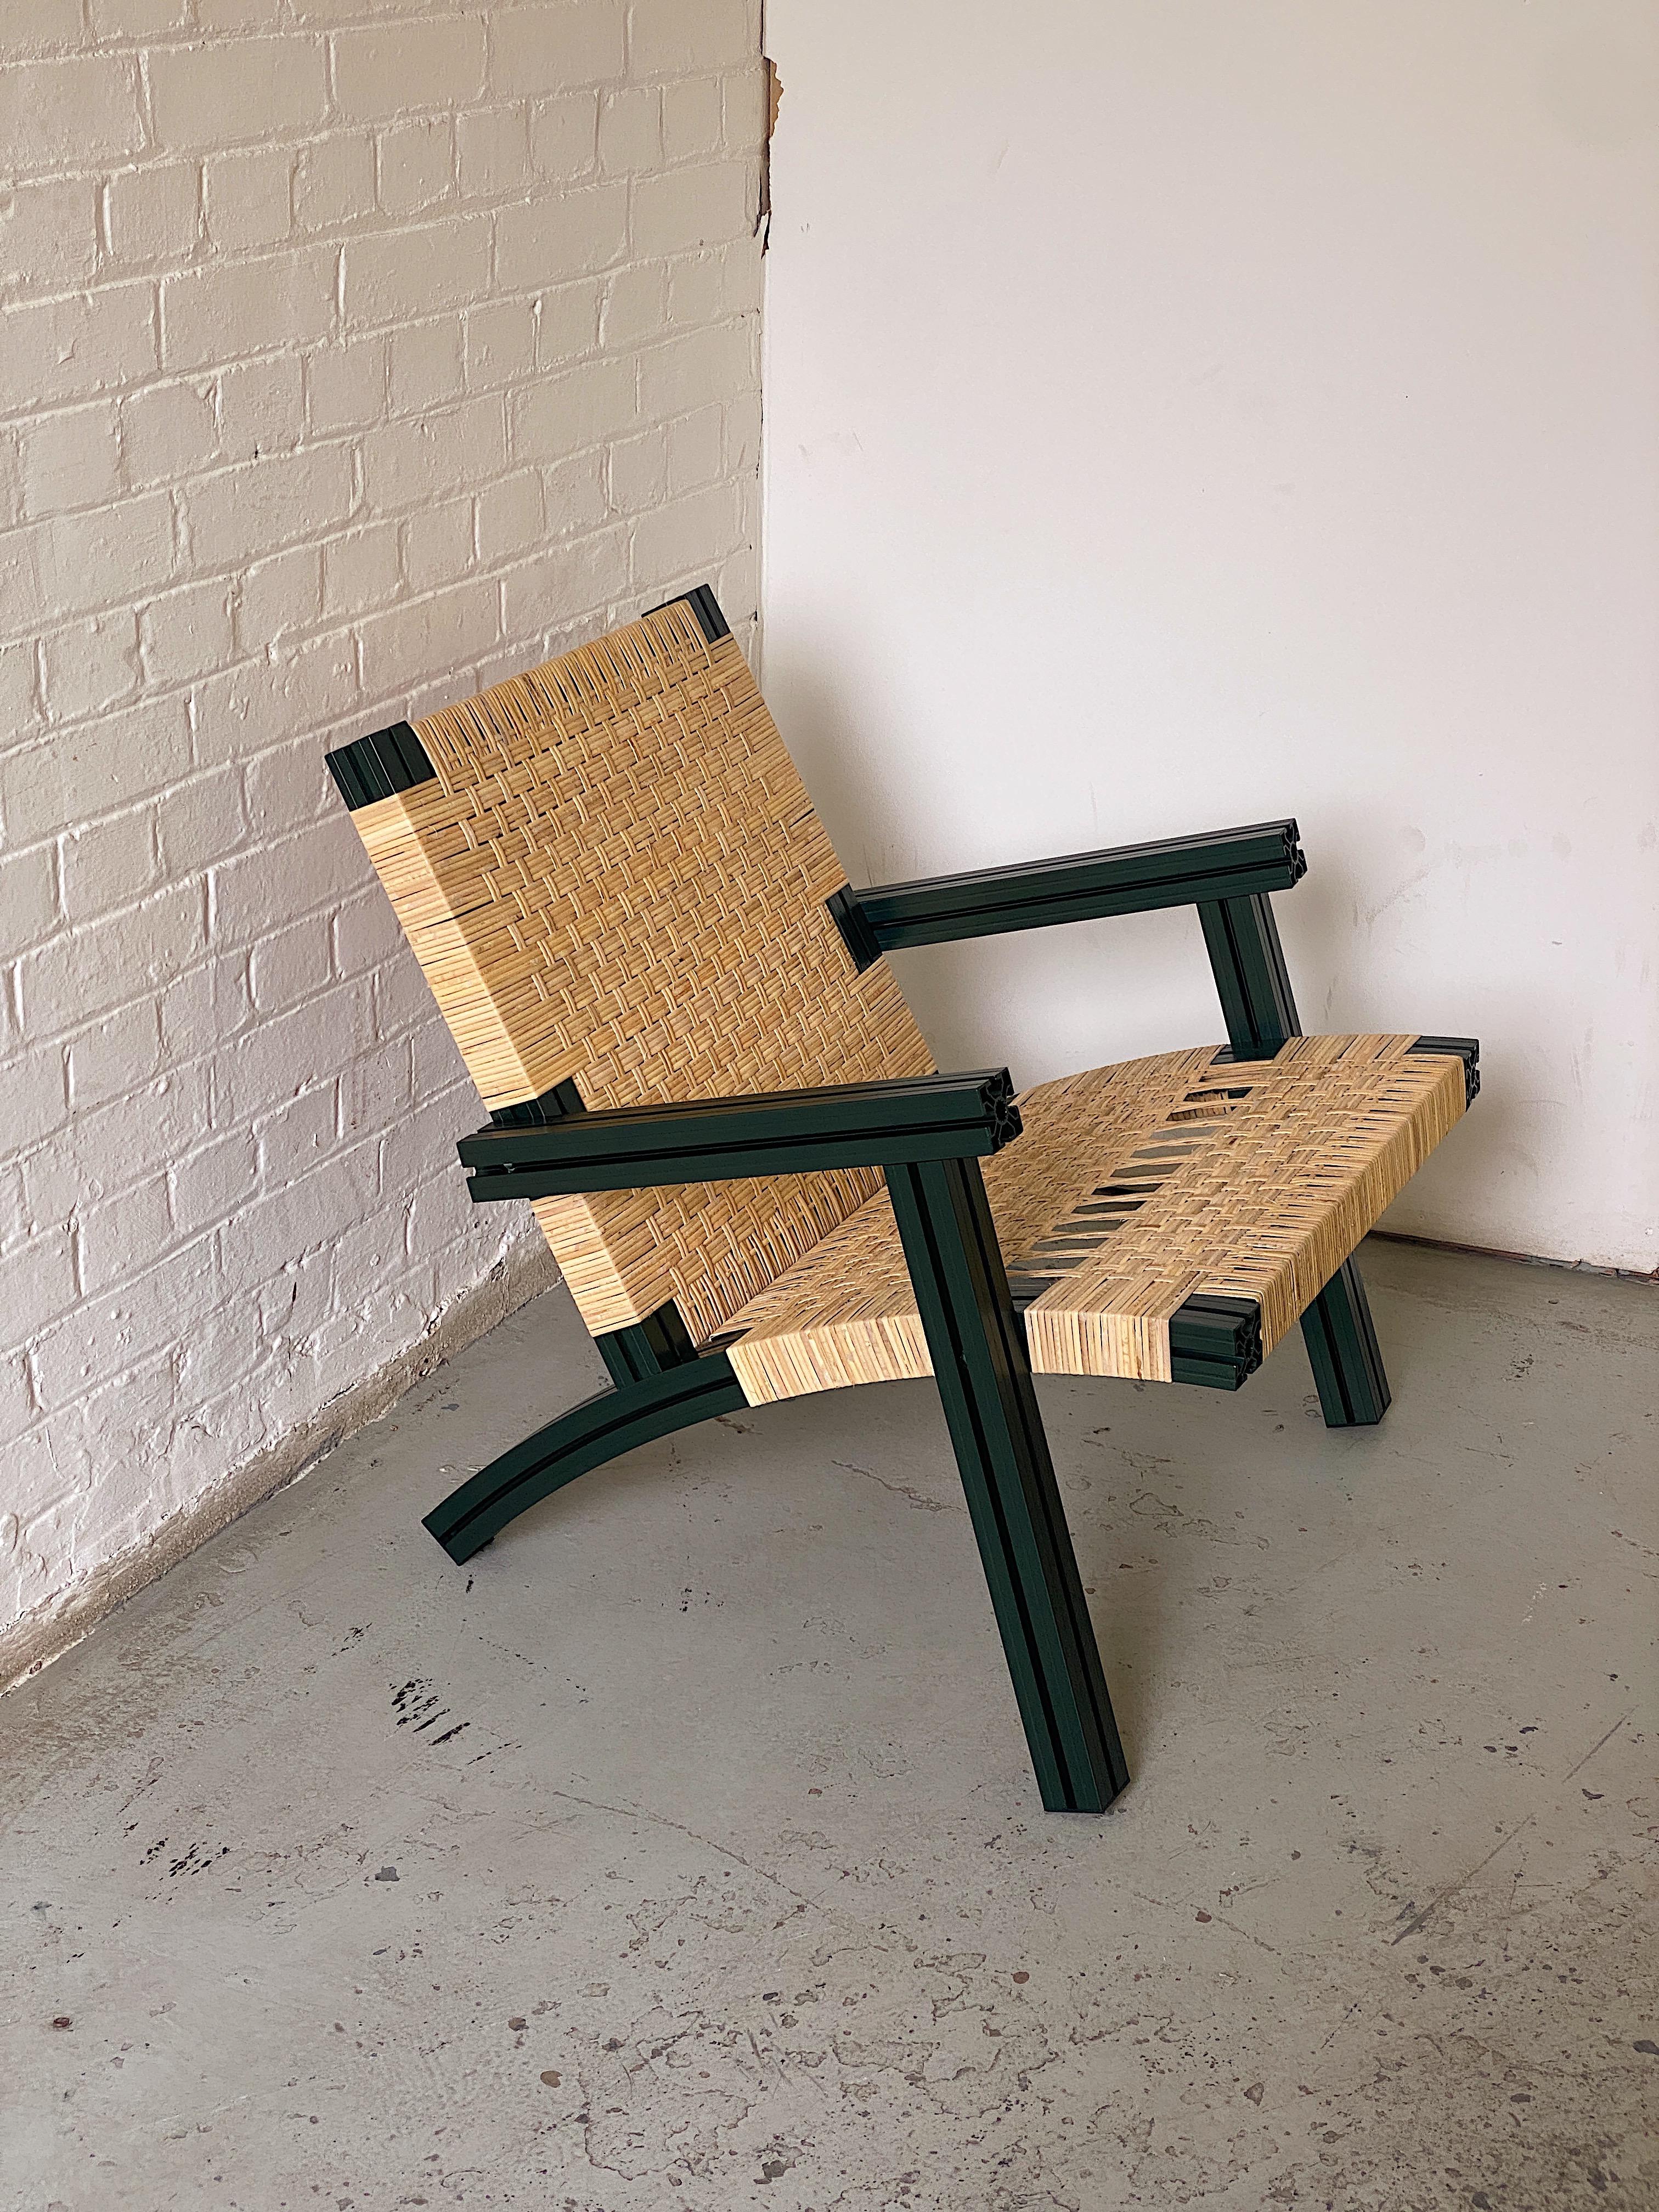 Armchair made from dark green anodised aluminium extrusions and woven cane seating.

Originally realised for the Hepworth Gallery in Wakefield and inspired by Donald Judd and Børge Mogensen, Anodised Wicker marries industrially extruded and anodised